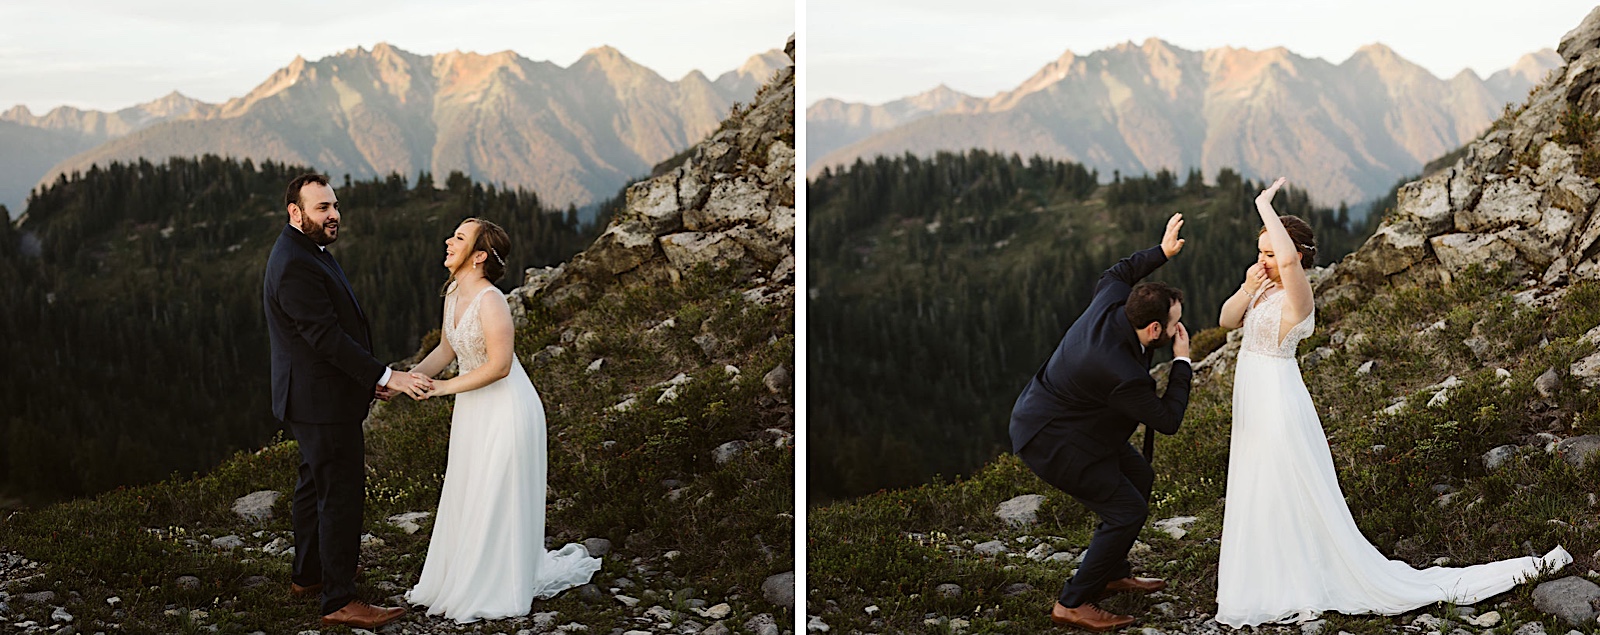 Mt. Baker Sunset Elopement bride and groom dance on the mountaintop